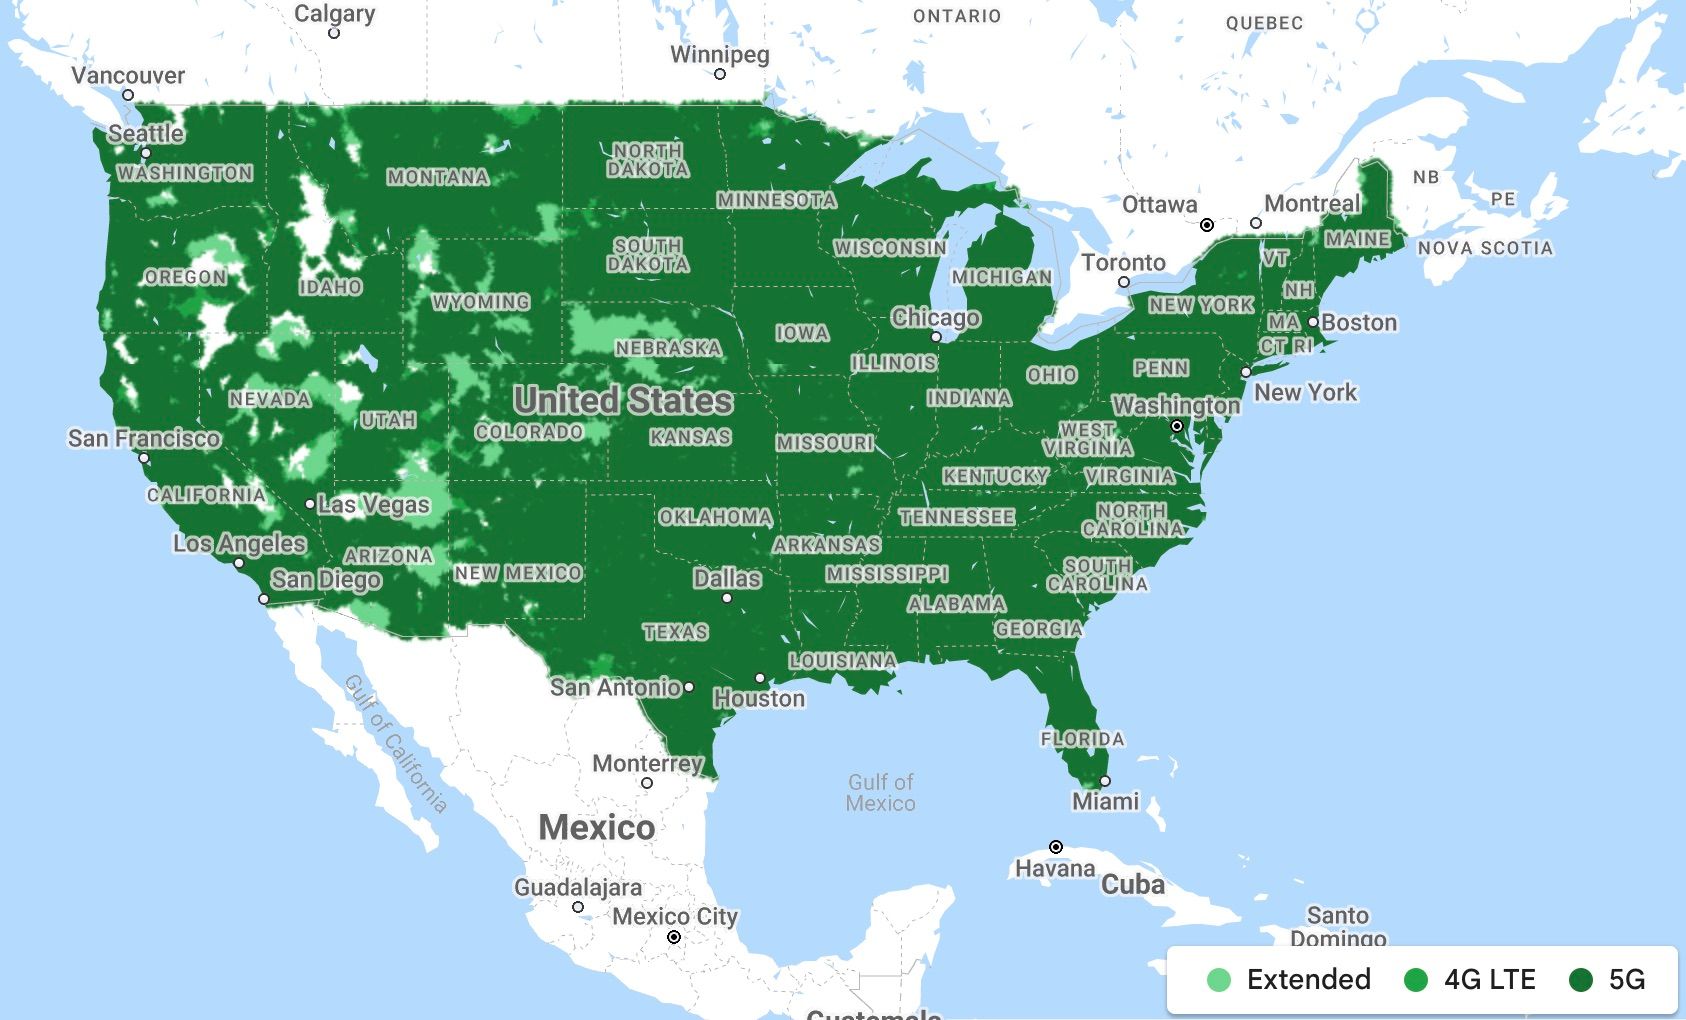 A cellular coverage map of the continental United States